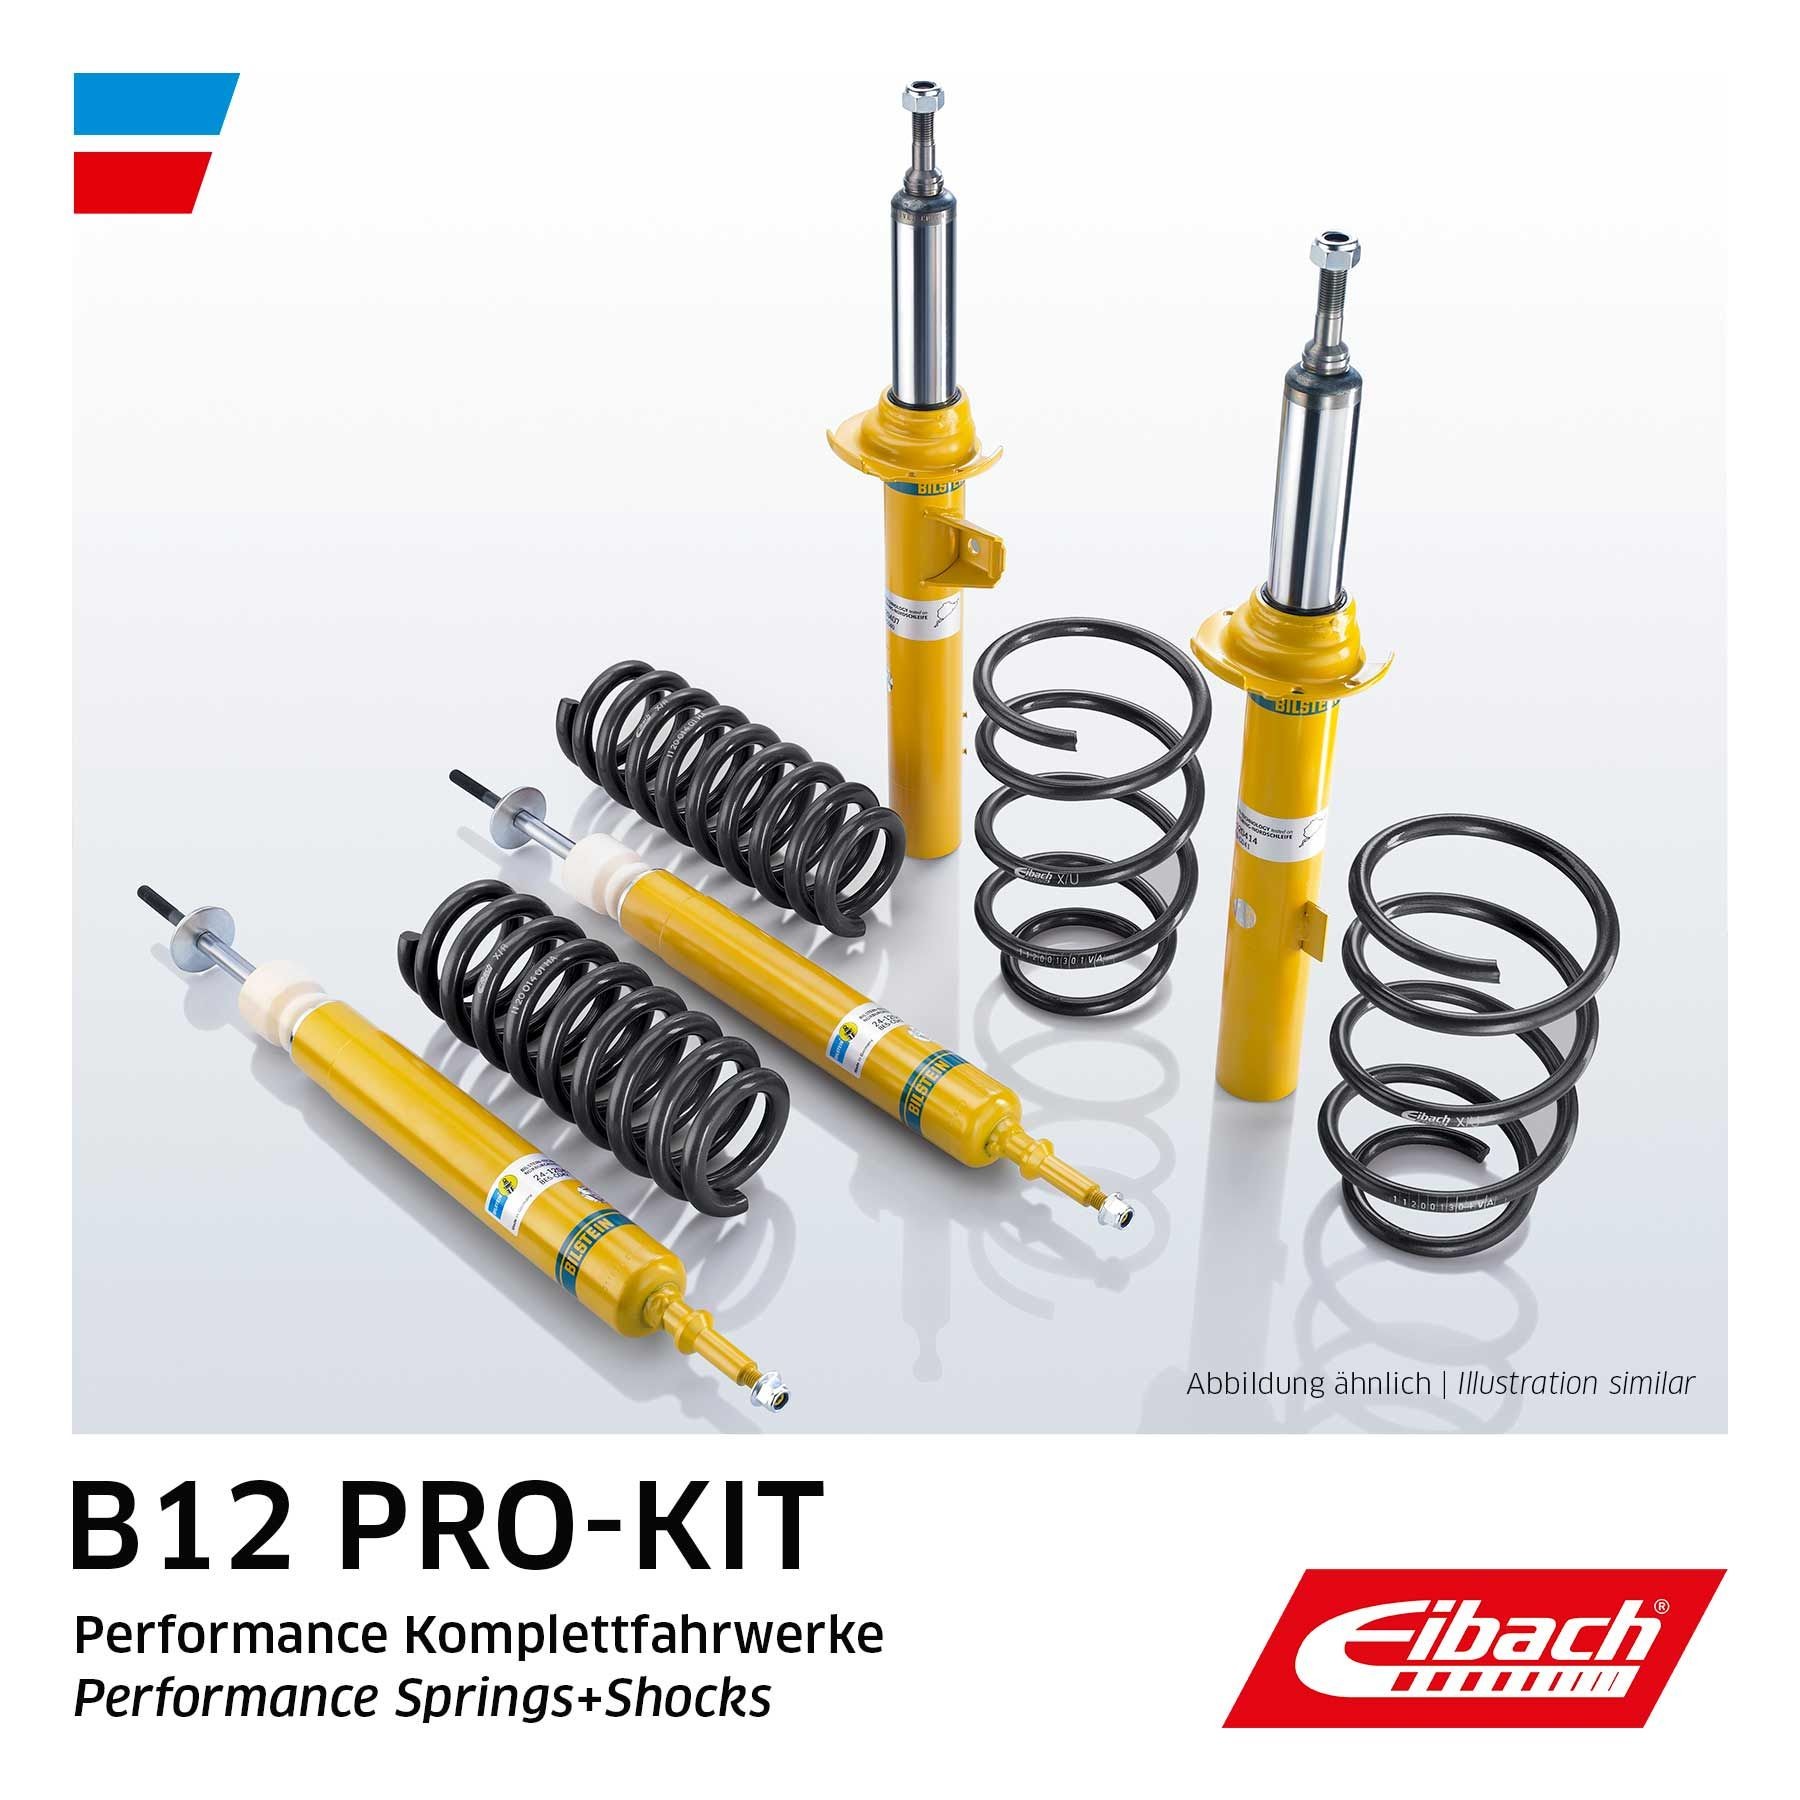 Chevrolet Suspension Kit, coil springs / shock absorbers EIBACH E90-65-001-10-22 at a good price